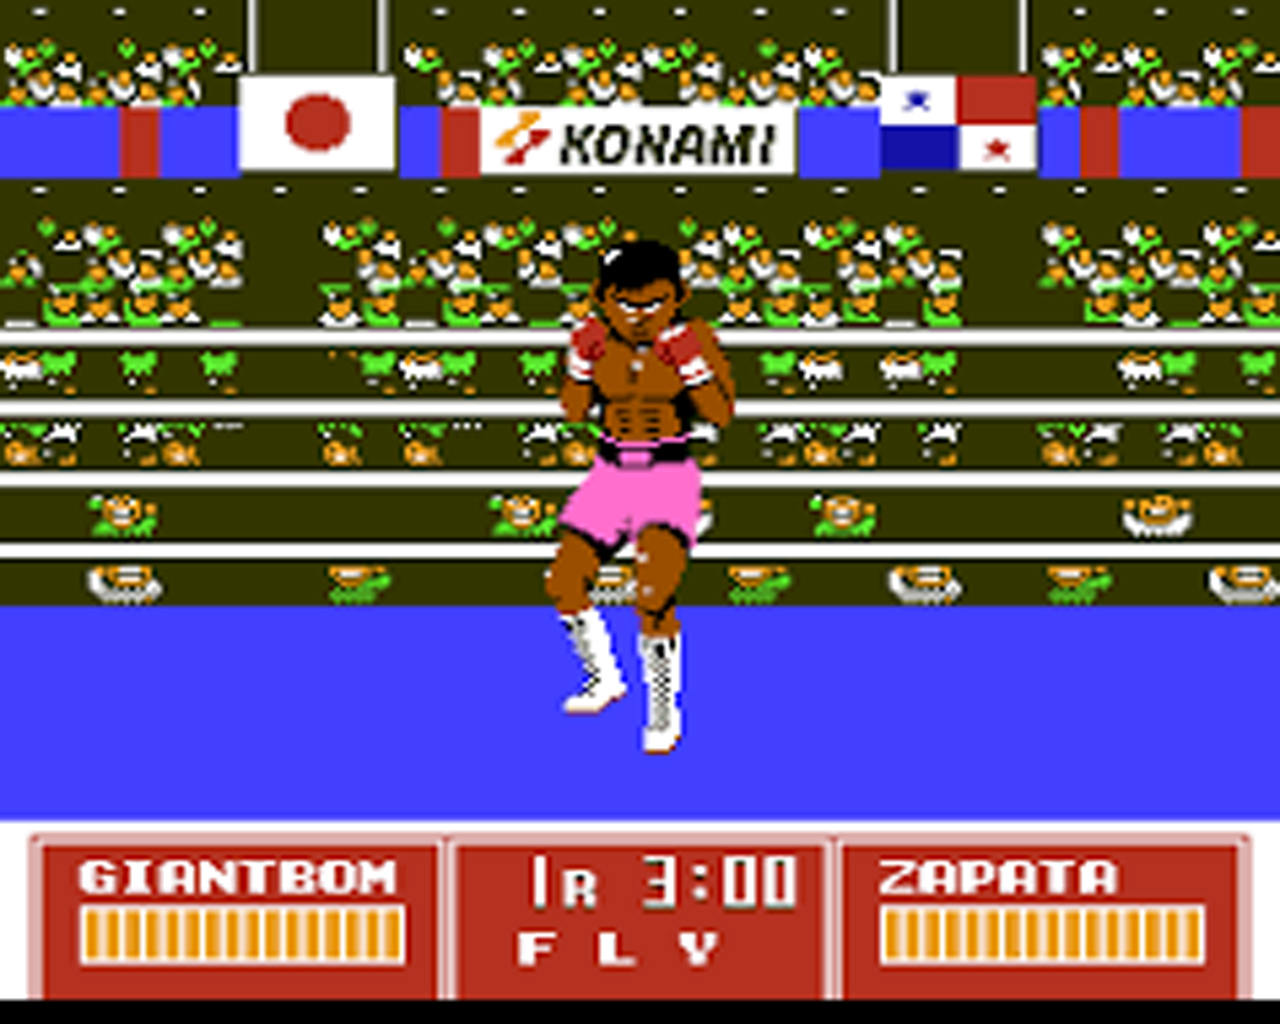 Untilited boxing game. NES games Boxing. Exciting Boxing Денди. NES games ROM. Бокс java игра.